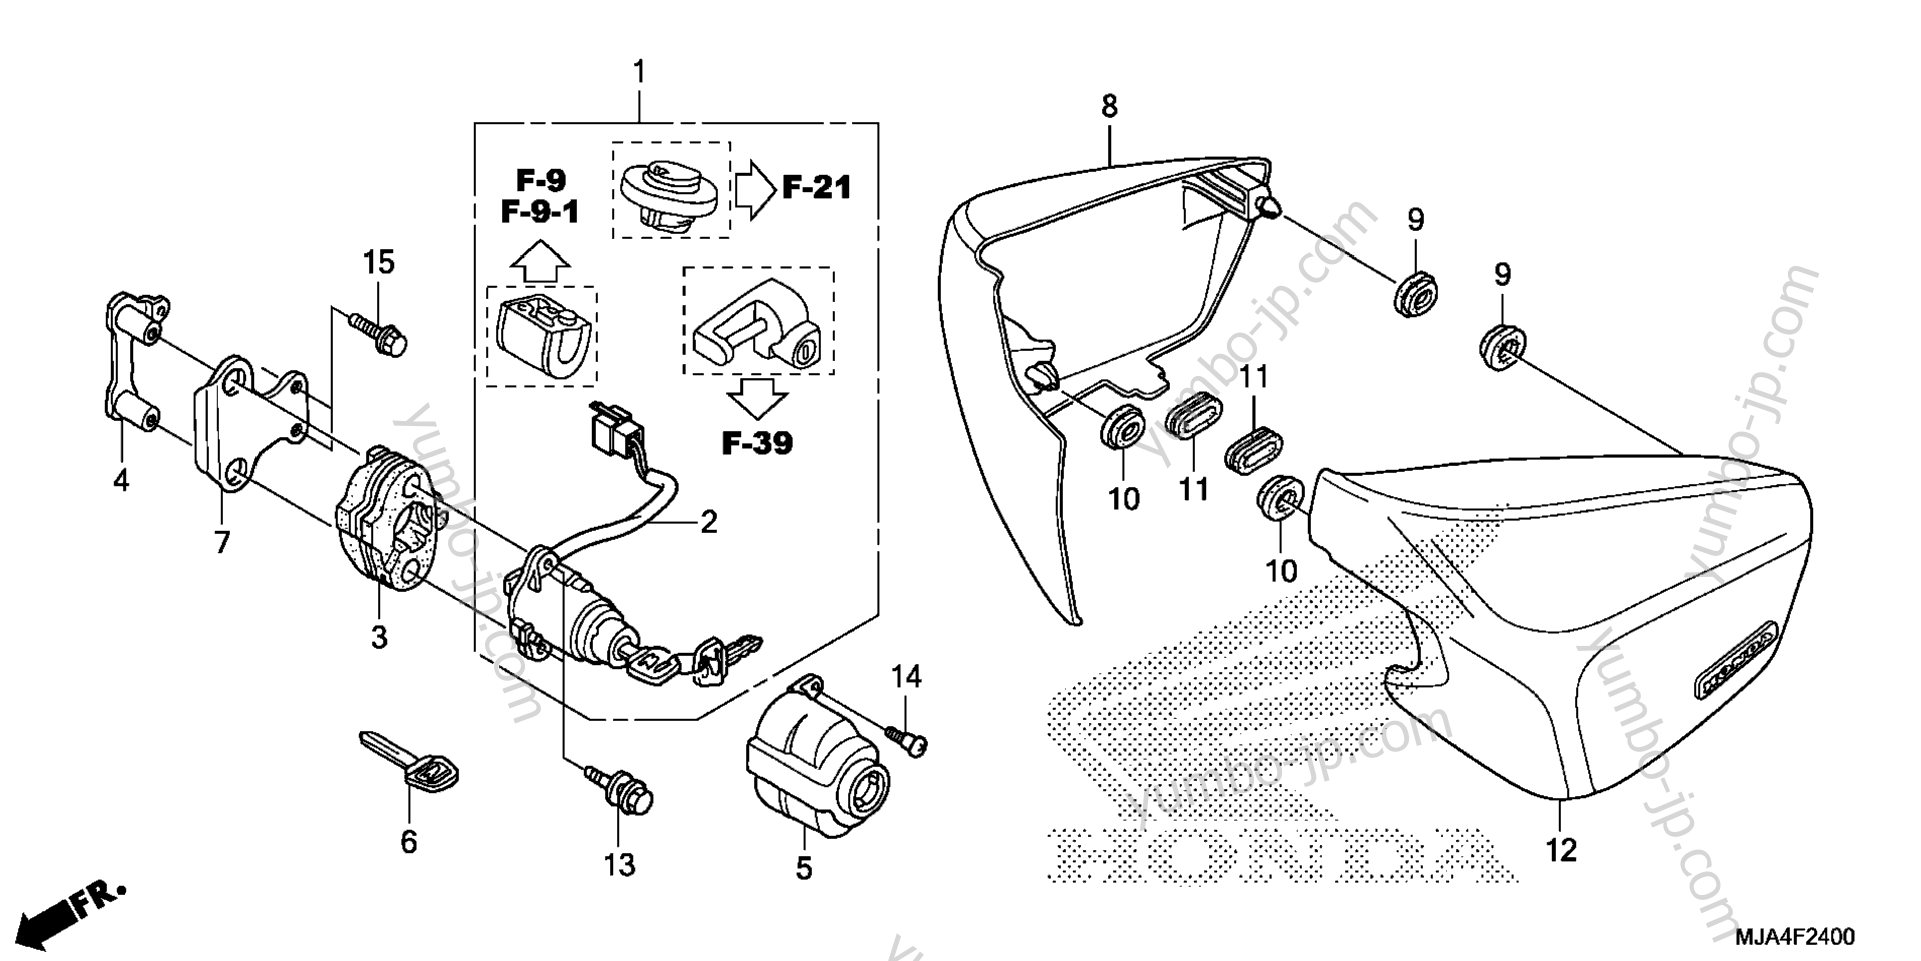 SIDE COVER (1) for motorcycles HONDA VT750CA A 2012 year